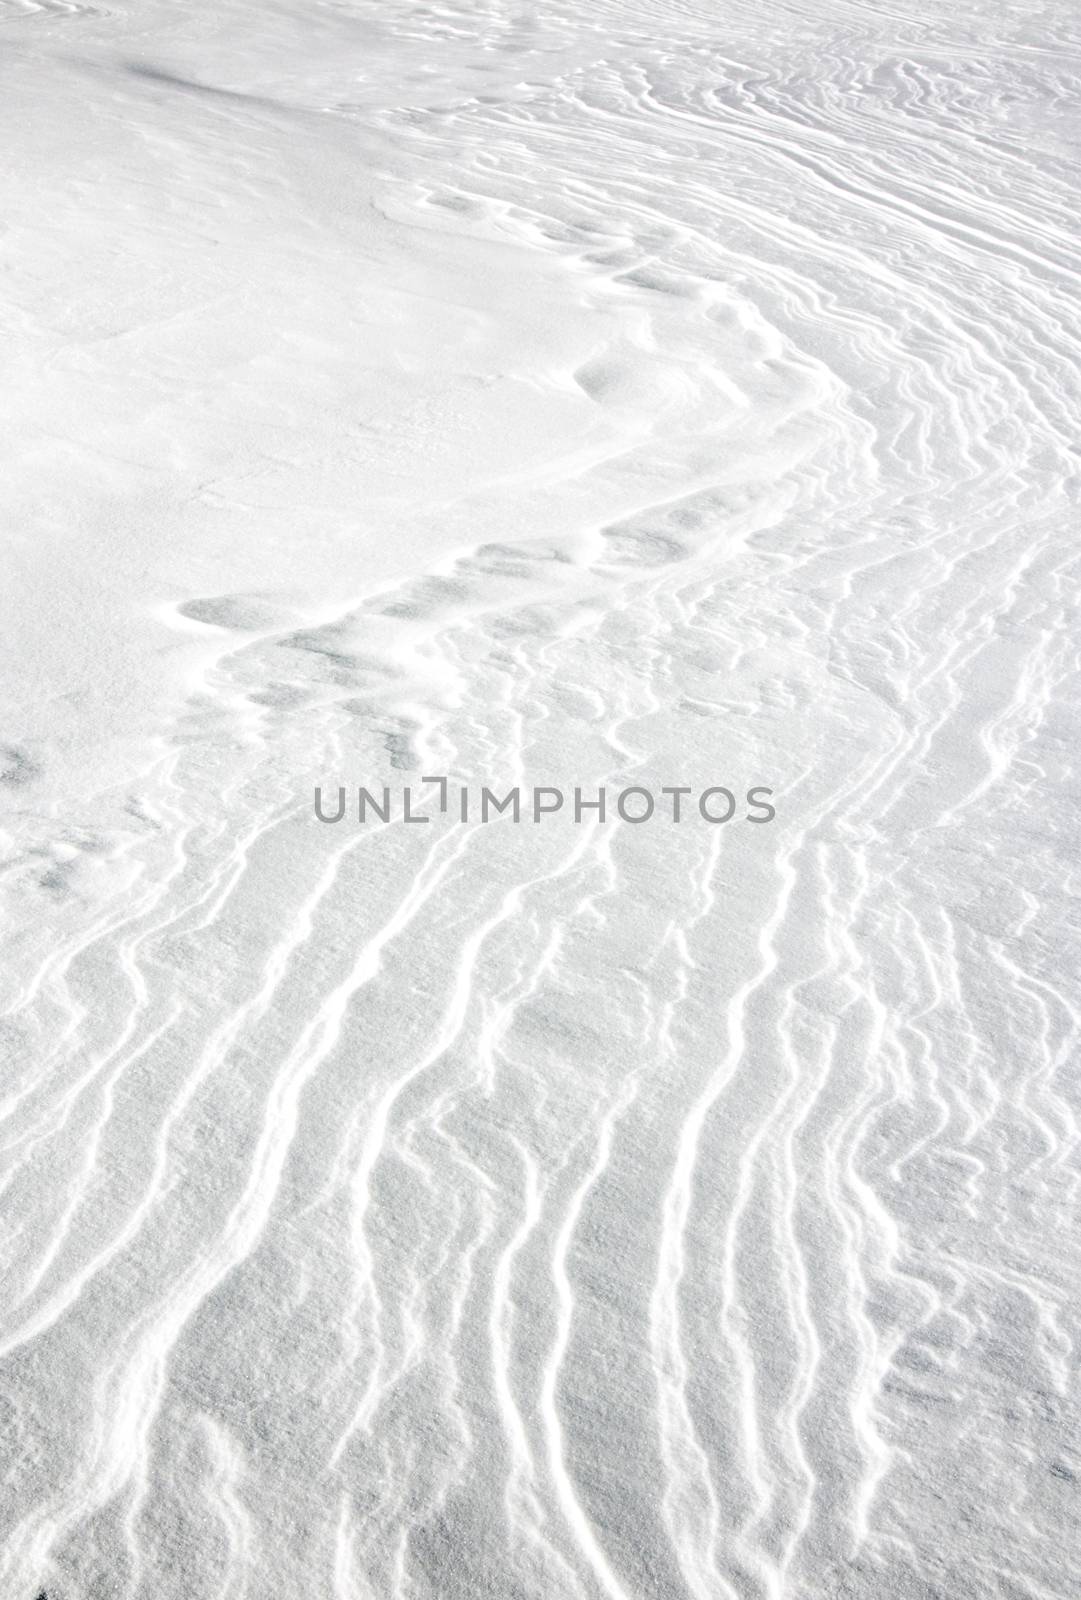 Snow patterns in winter by Njean